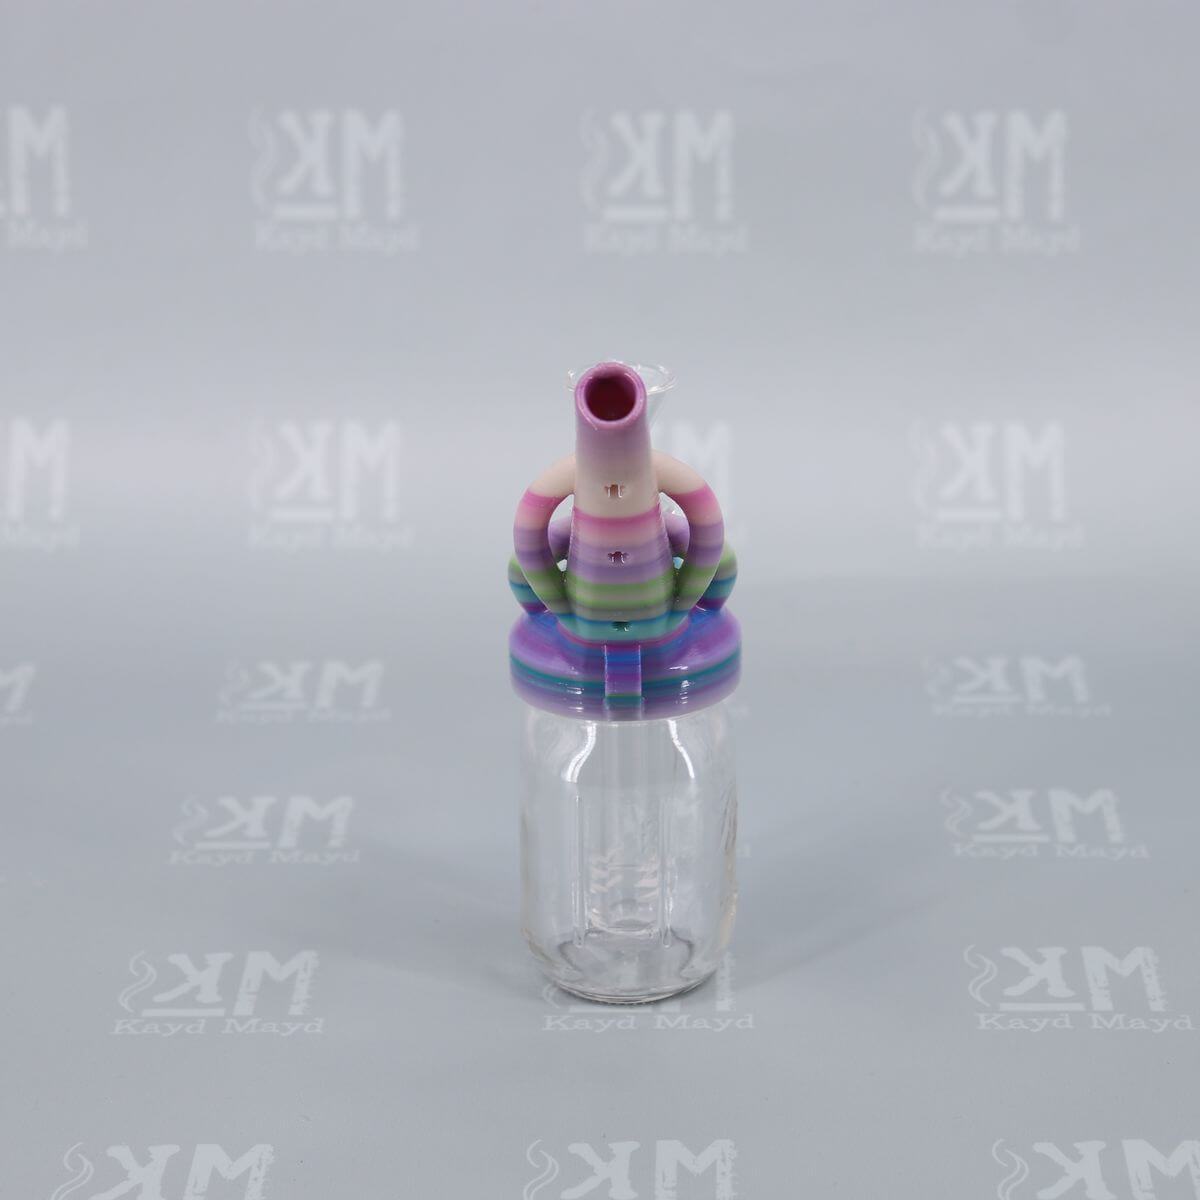 Front Summertime Bubble Gum color of Wee Billy Bubbler No. 2 - Amazing 3D Printed Water Pipe by Kayd Mayd